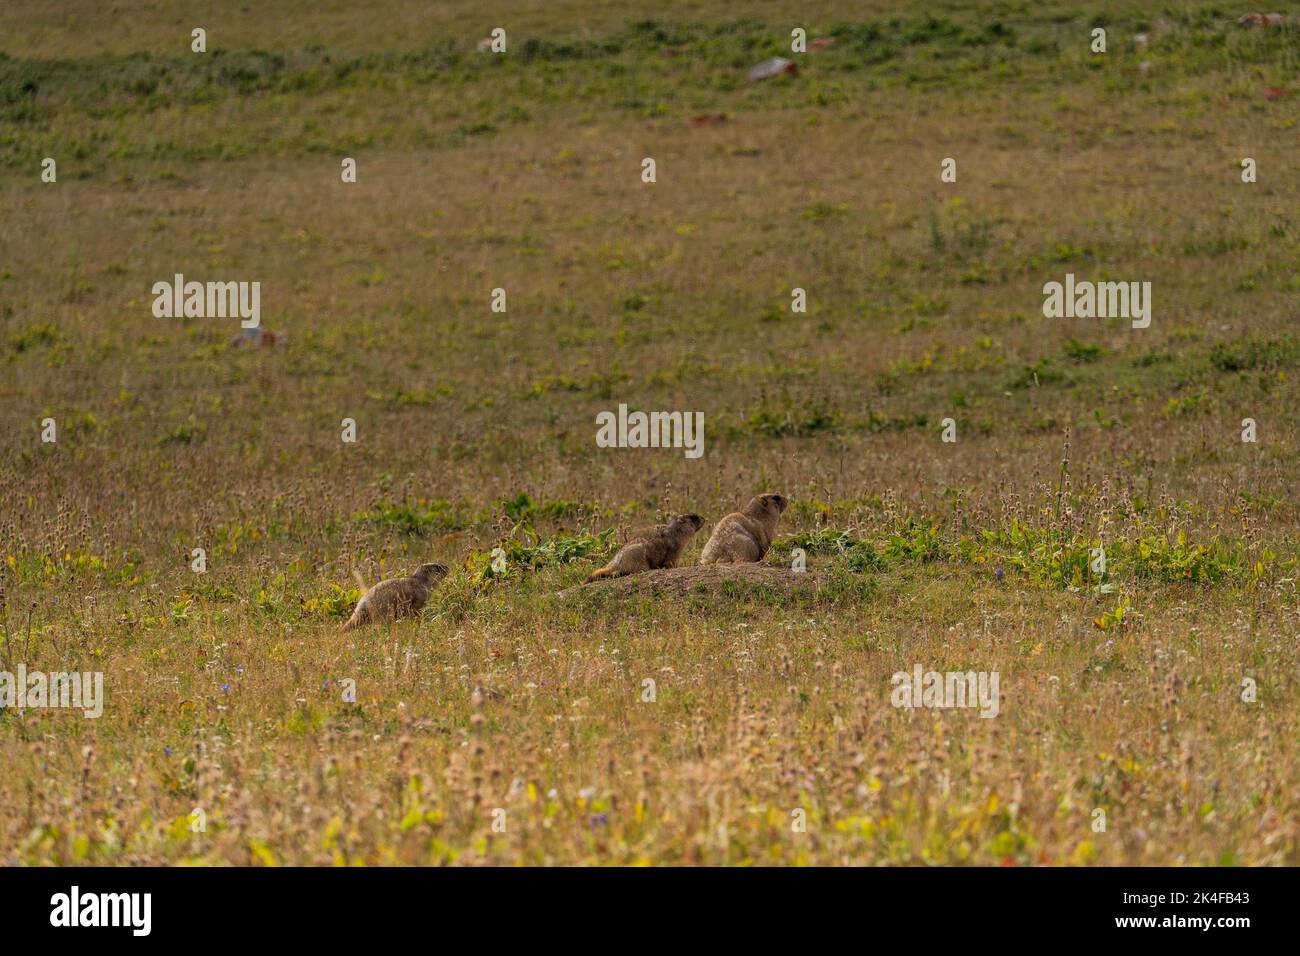 Group of marmots in grass Song Kul Lake, Kyrgyzstan Stock Photo